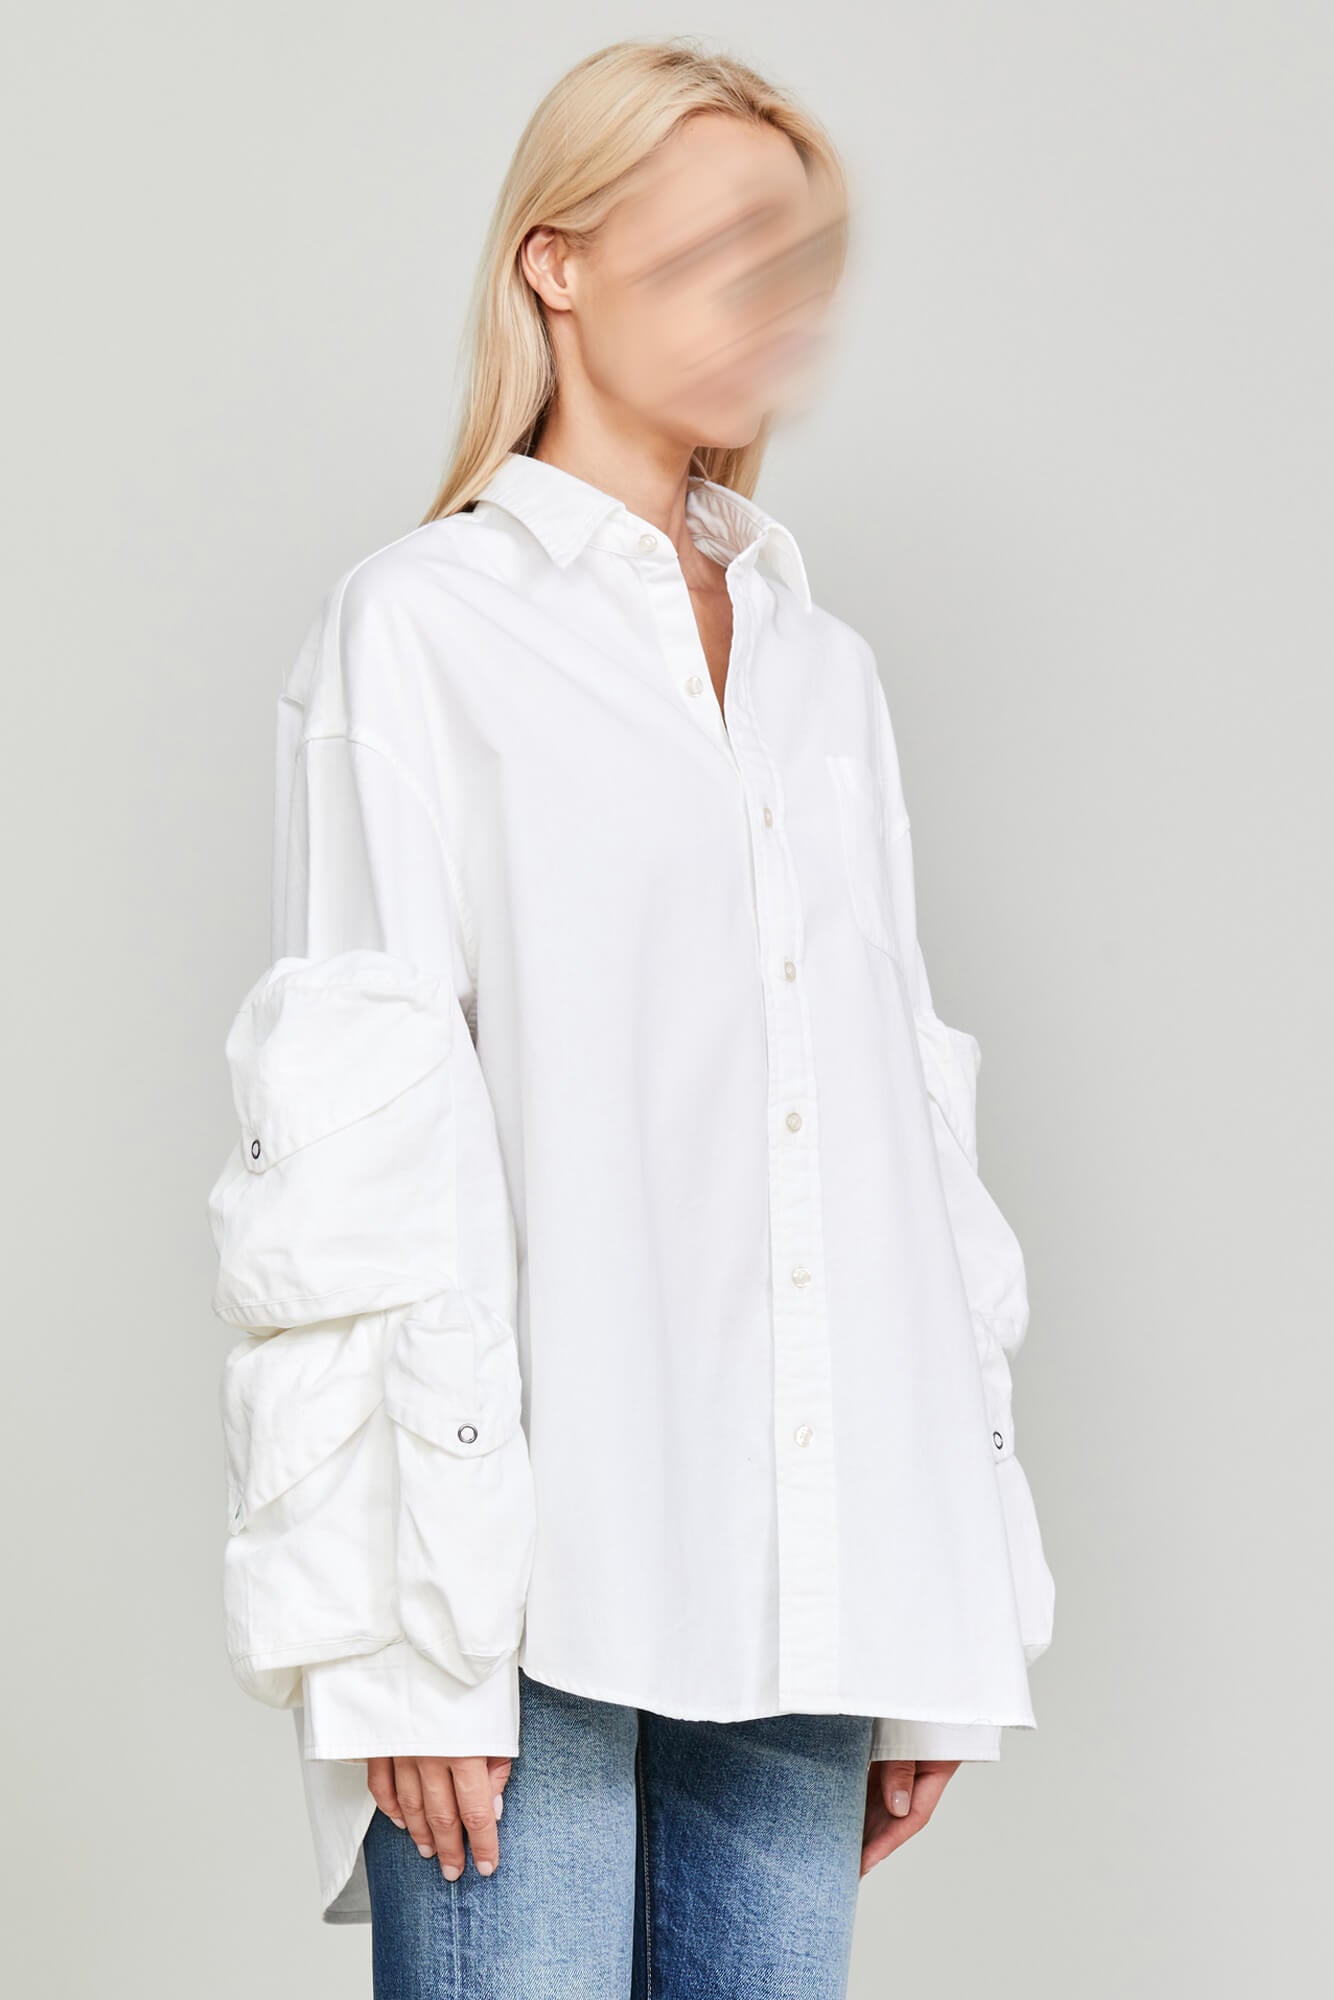 MULTIPOCKET BUTTON DOWN - WHITE